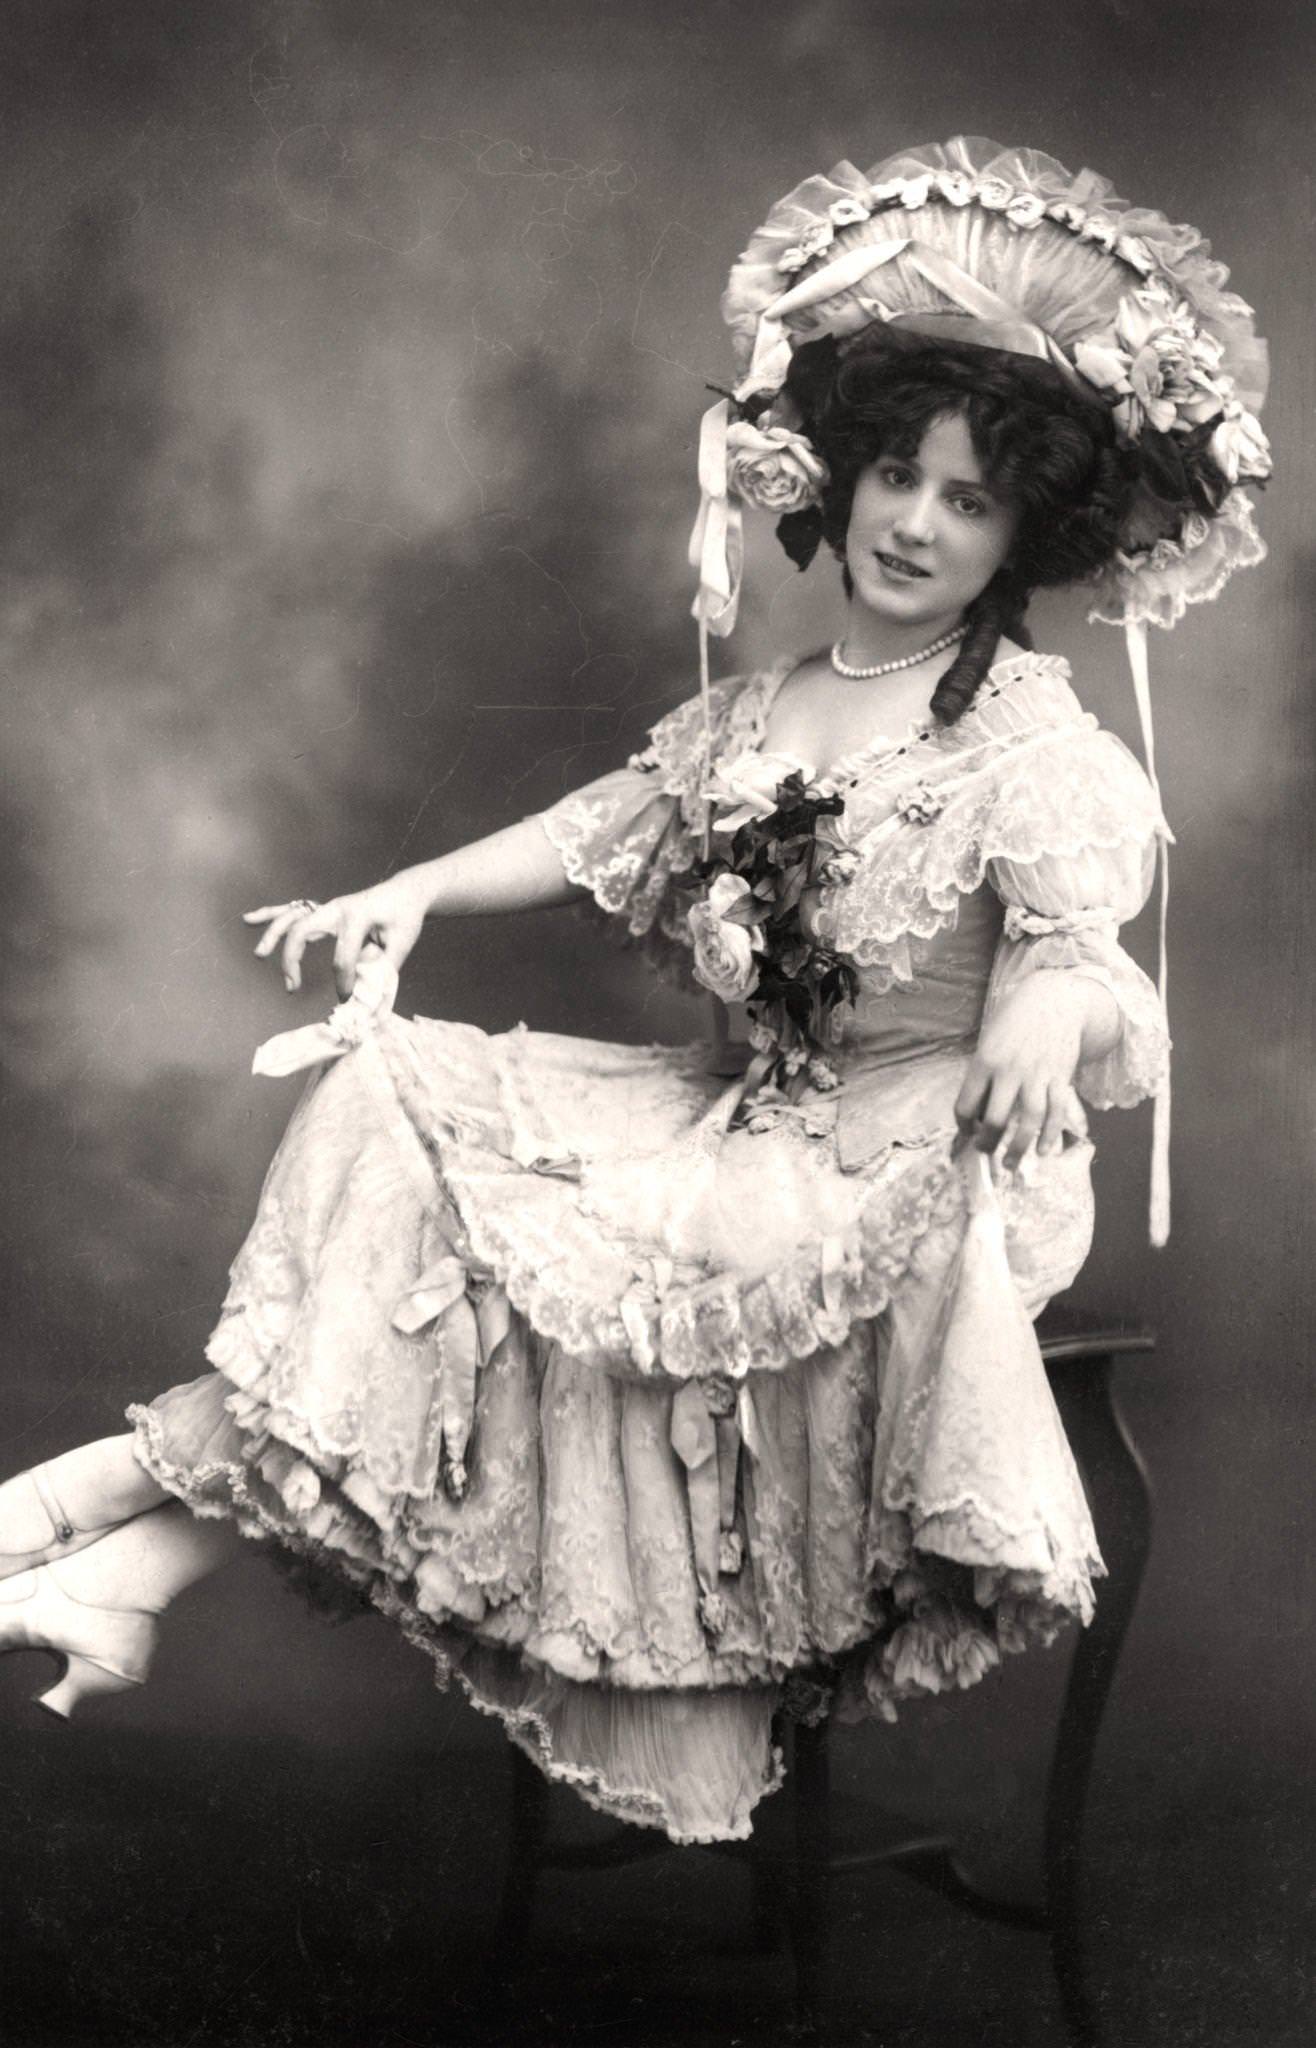 Gabrielle Ray poses for a portrait in the early 1900s